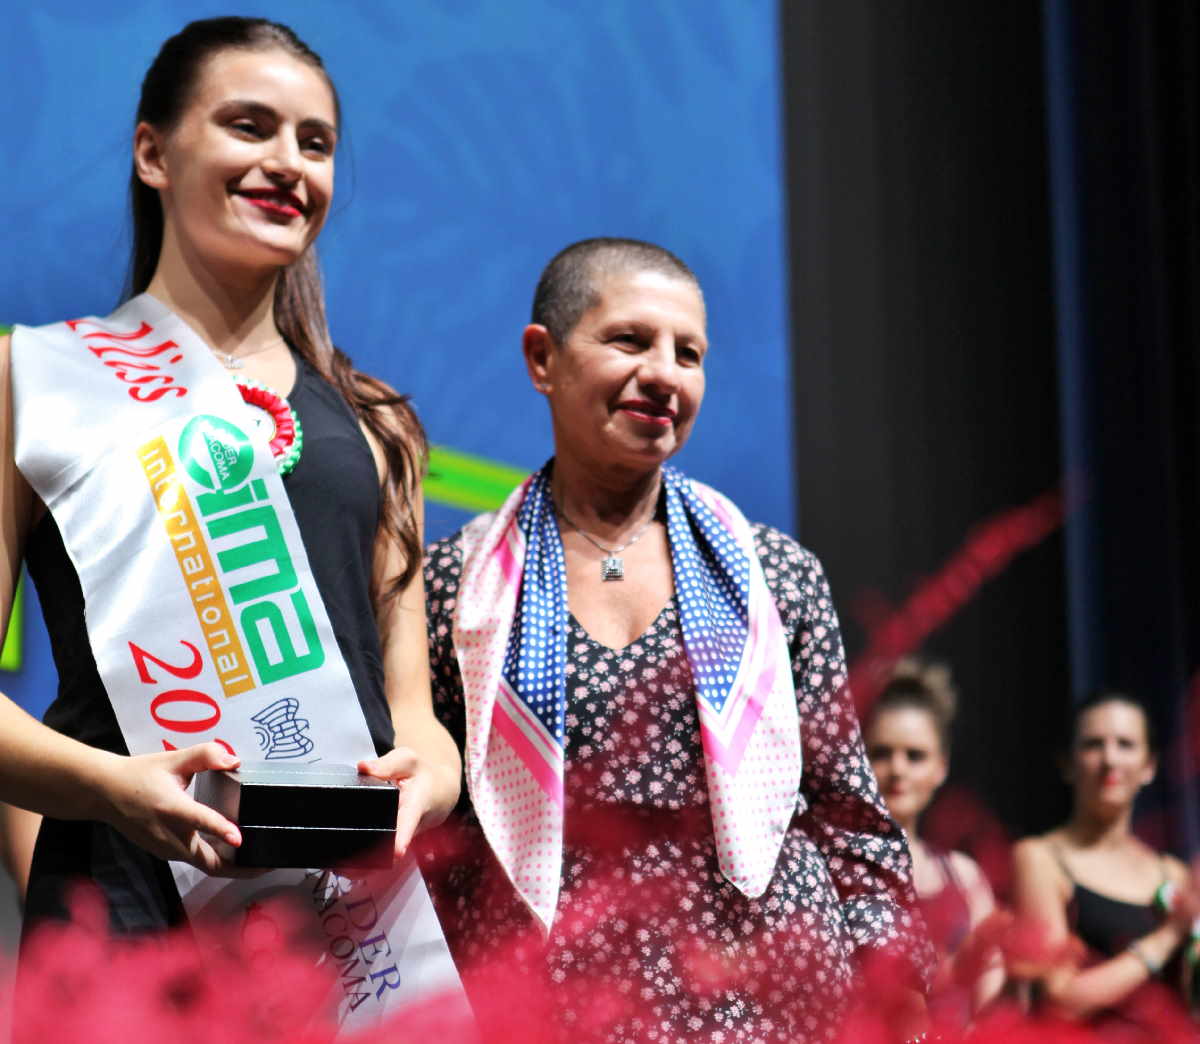 Canavese Miss Eima